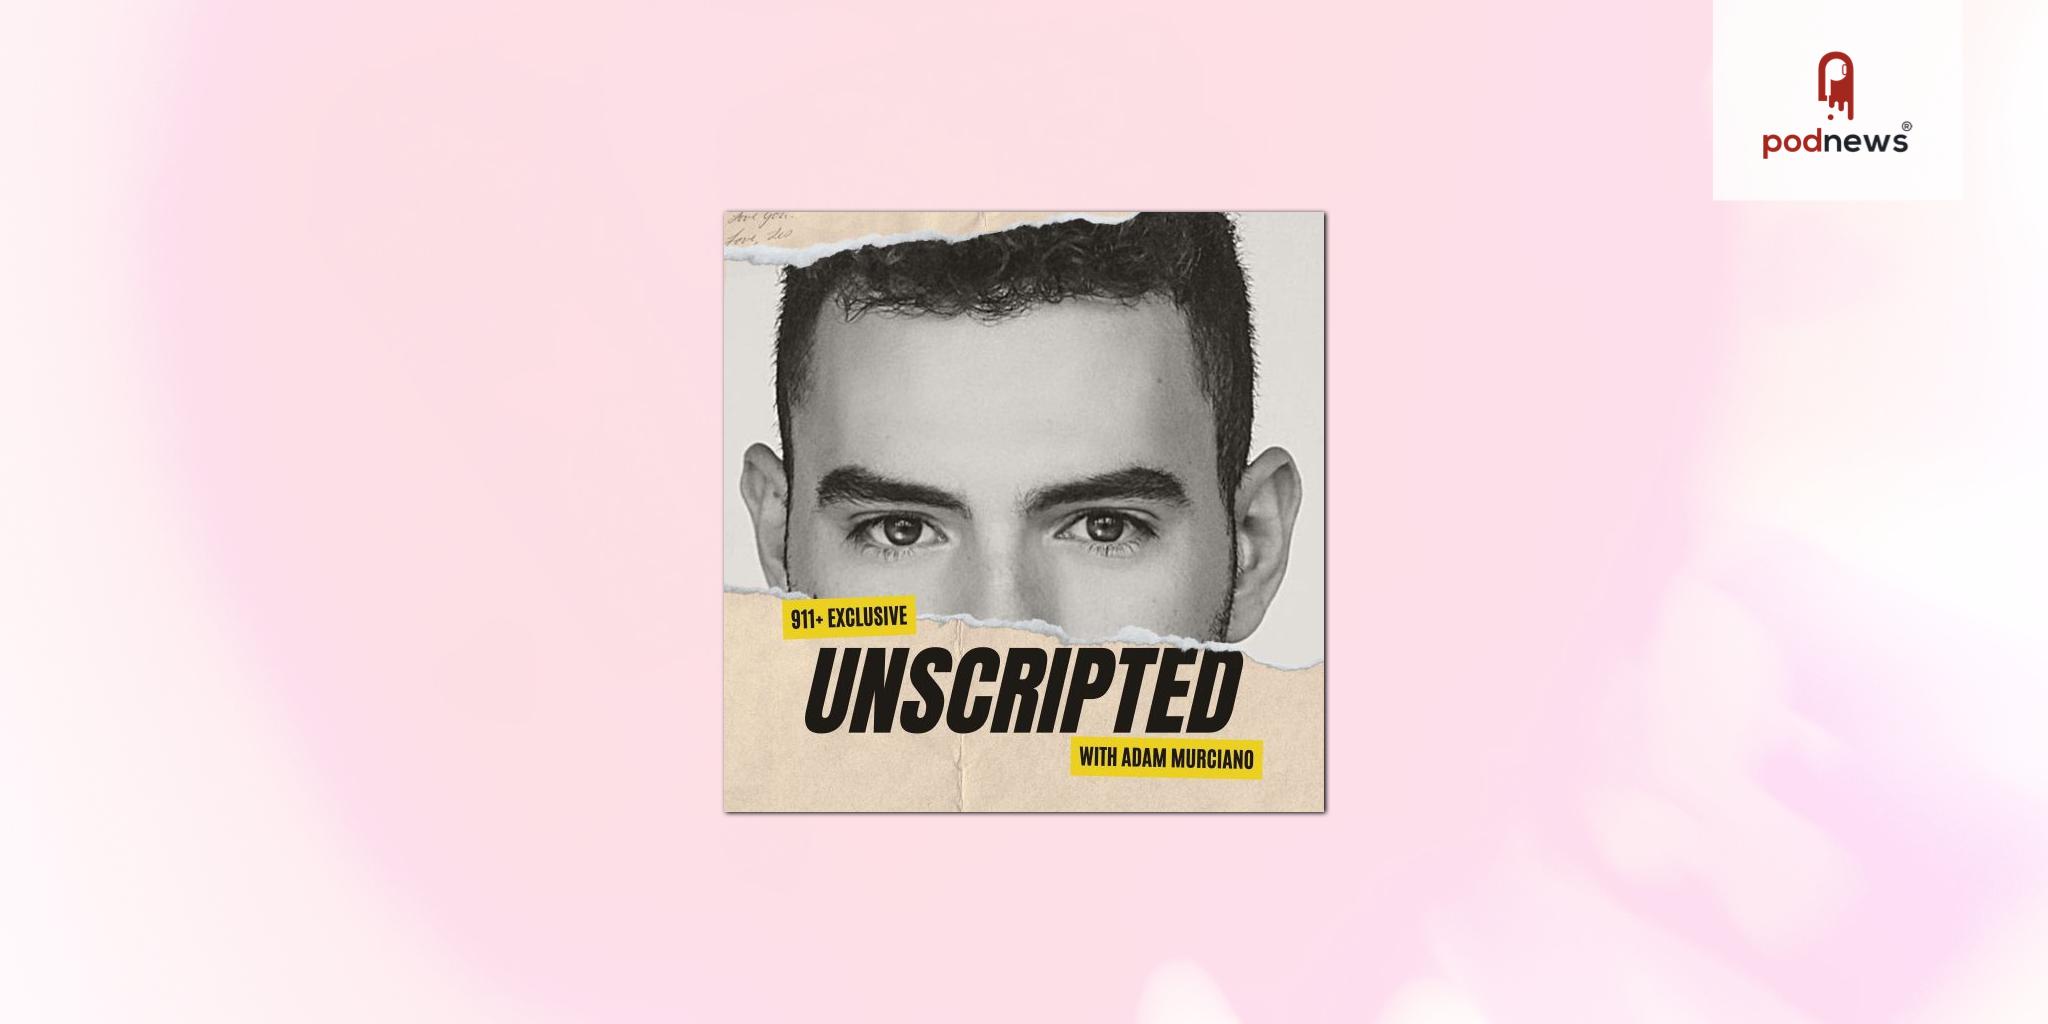 911 Podcasts Launches First Unscripted Podcasts Series Titled ‘Unscripted’